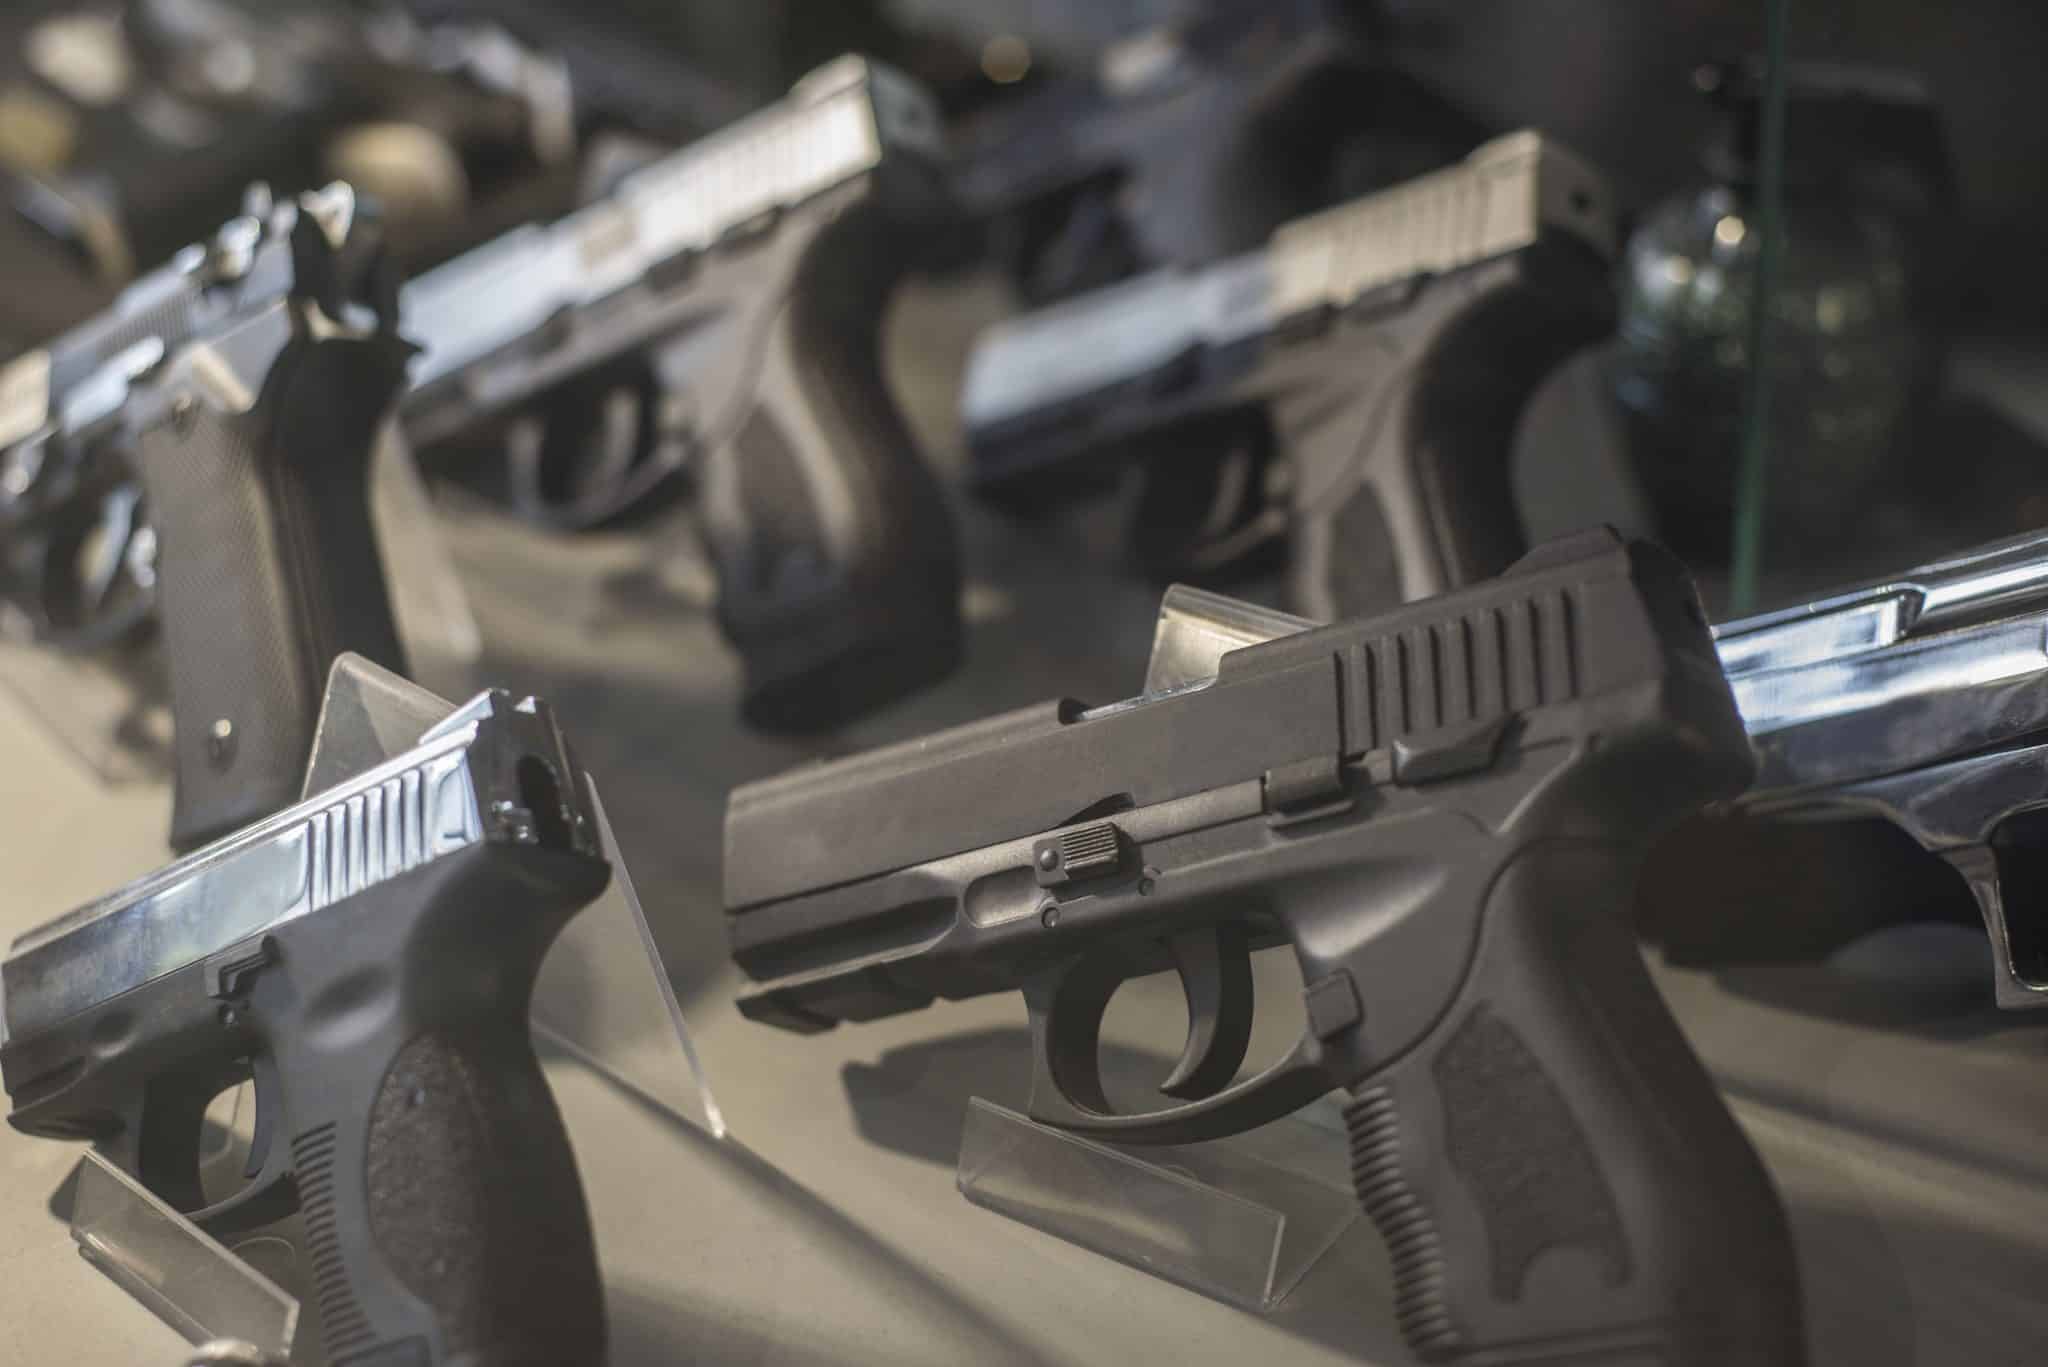 How a New Permitless Carrying of Handguns Bill Could Impact Criminal Law in Texas